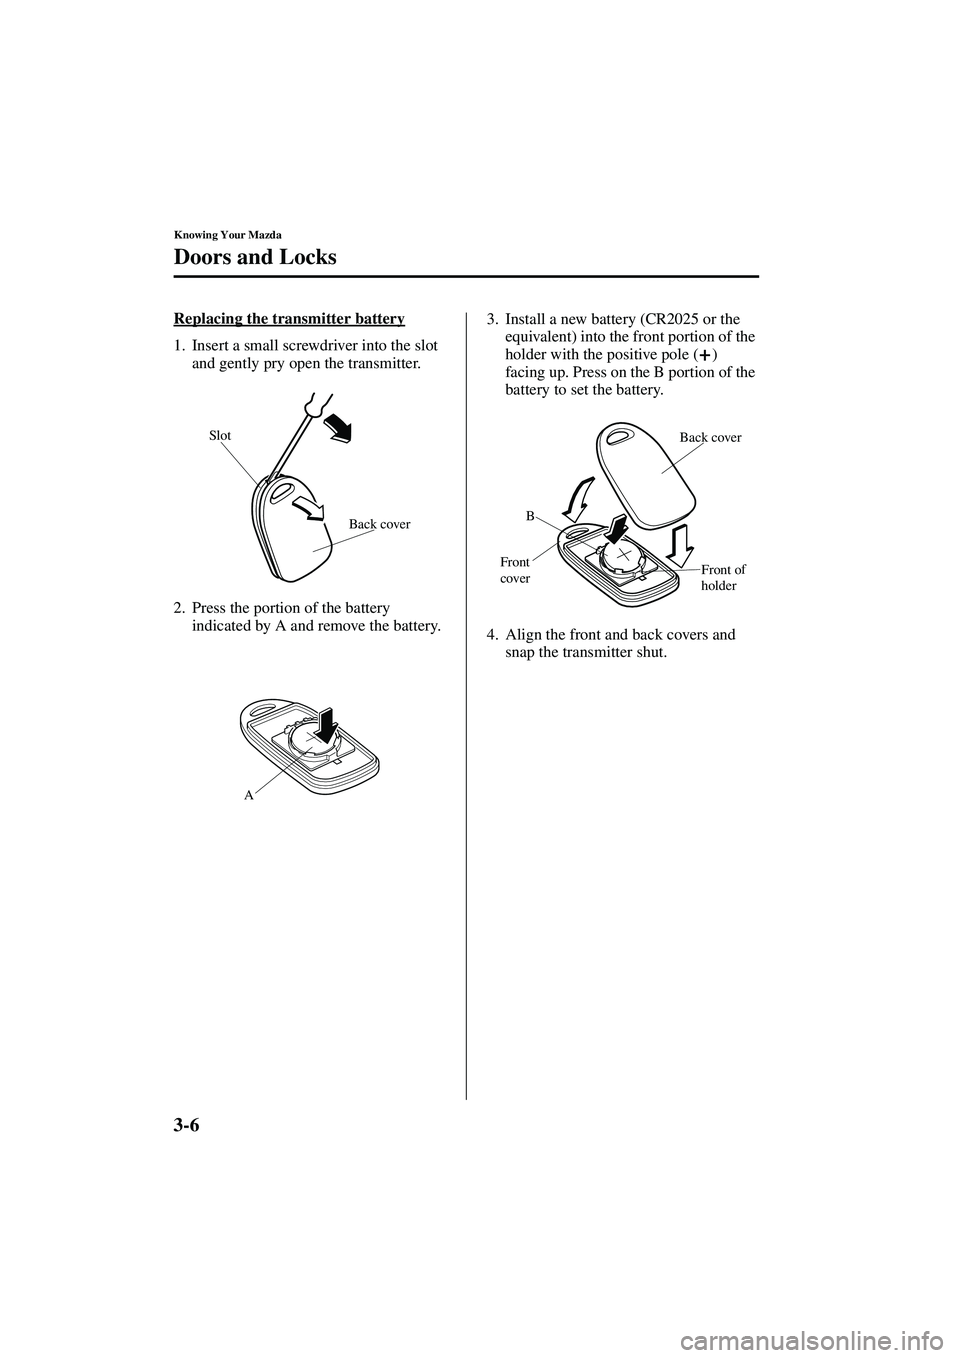 MAZDA MODEL MX-5 MIATA 2003 Service Manual 3-6
Knowing Your Mazda
Doors and Locks
Form No. 8R09-EA-02G
Replacing the transmitter battery
1. Insert a small screwdriver into the slot and gently pry open the transmitter.
2. Press the portion of t